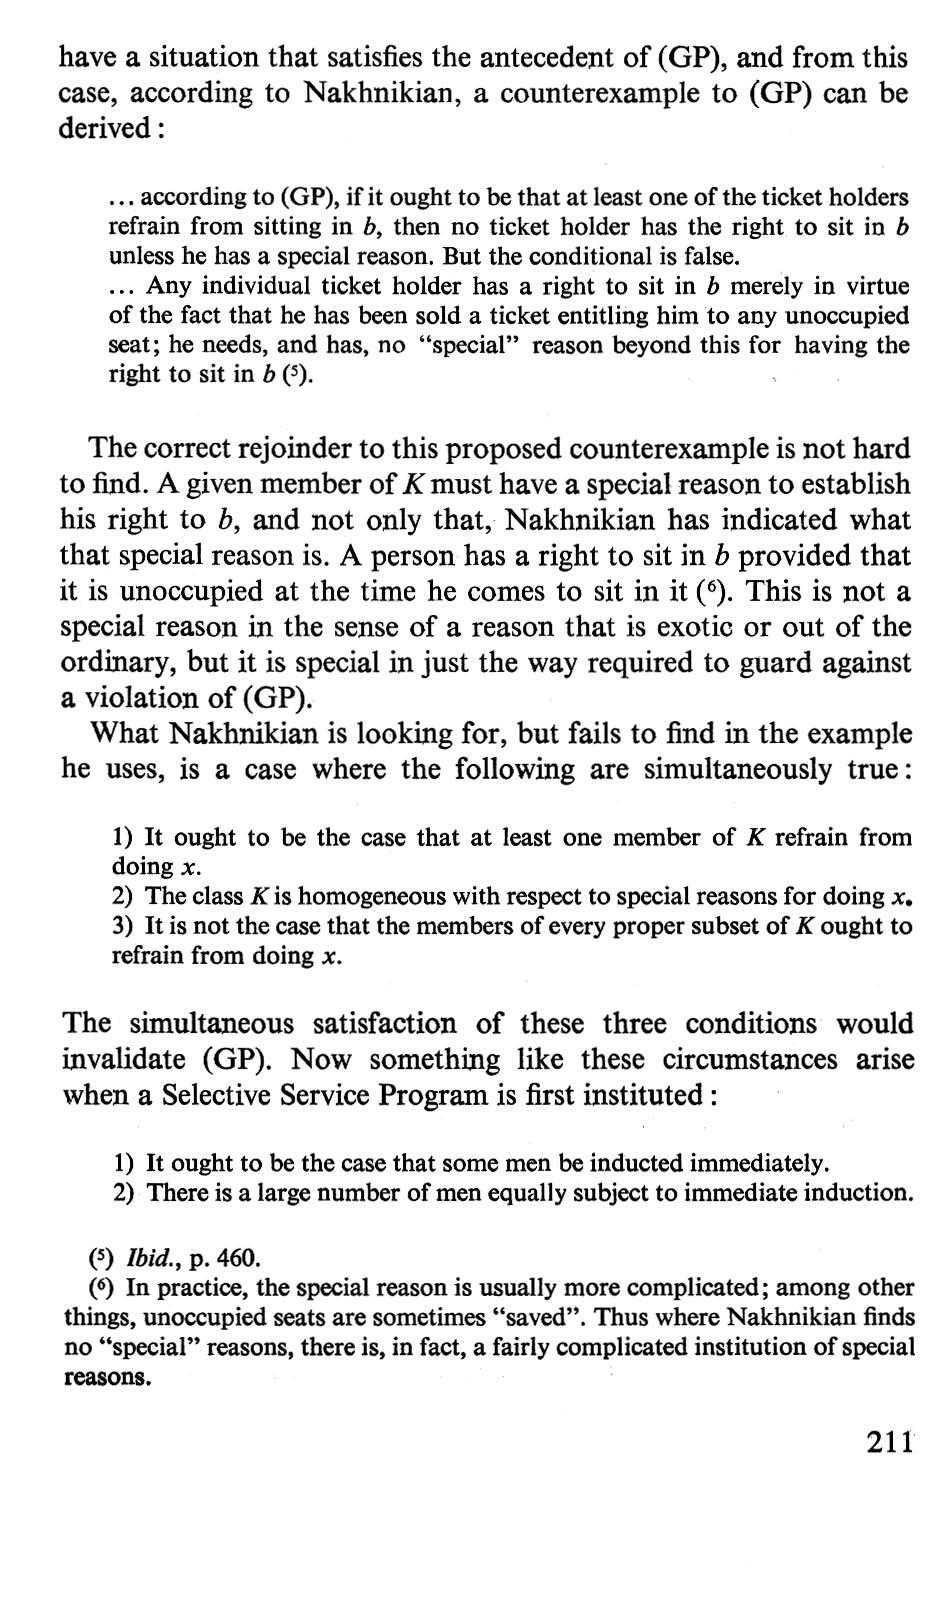 have a situation that satisfies the antecedent of GP), and from this case, according to Nakhnikian, a counterexample to GP) can be derived : according to GP), if it ought to be that at least one of